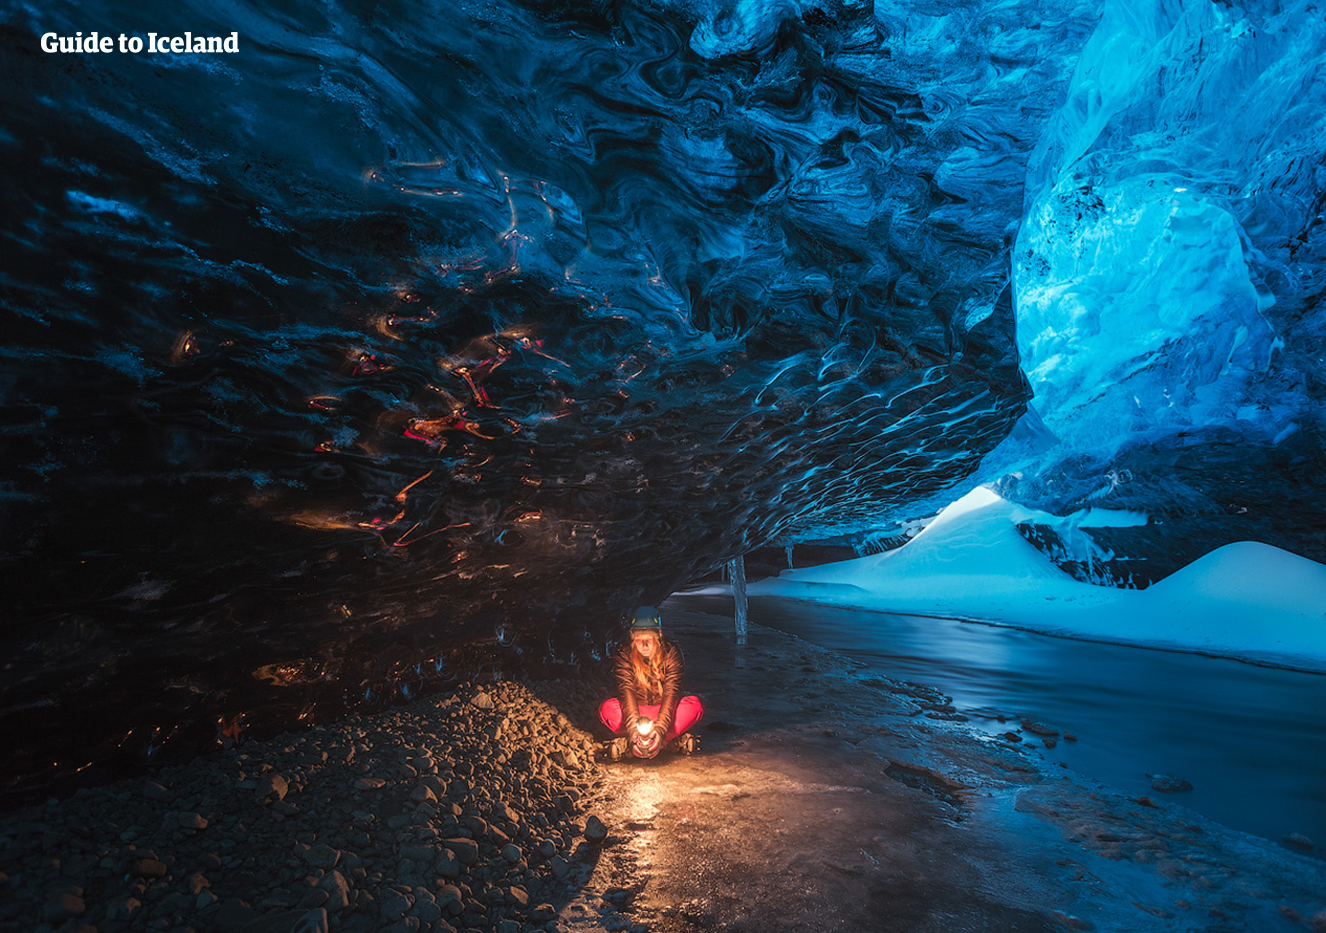 Exploring a natural ice cave is a unique experience only available between November and March